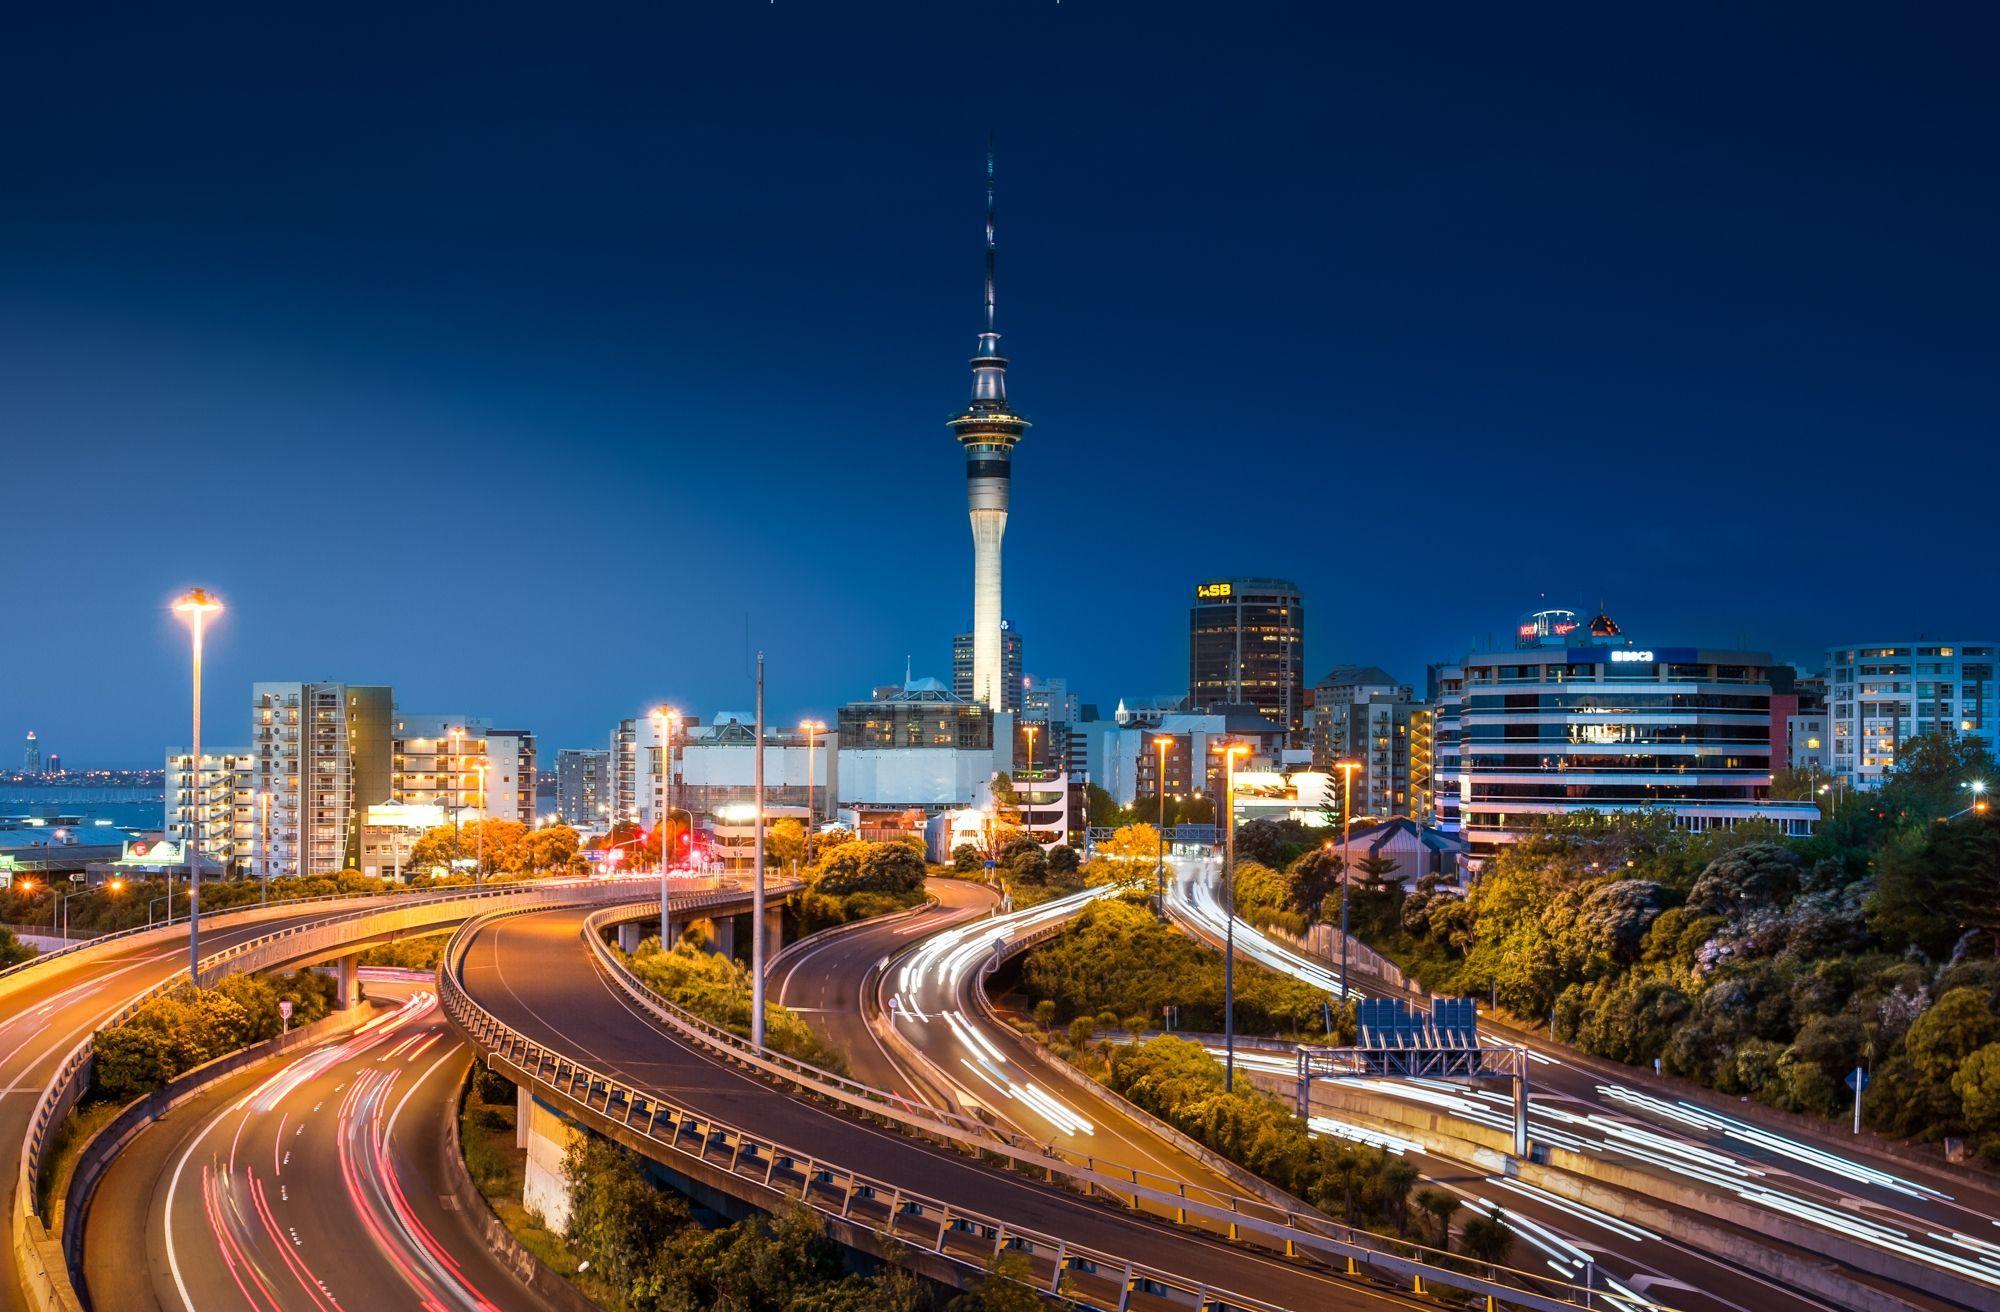 Download Wallpapers road auckland night city new zealand sky